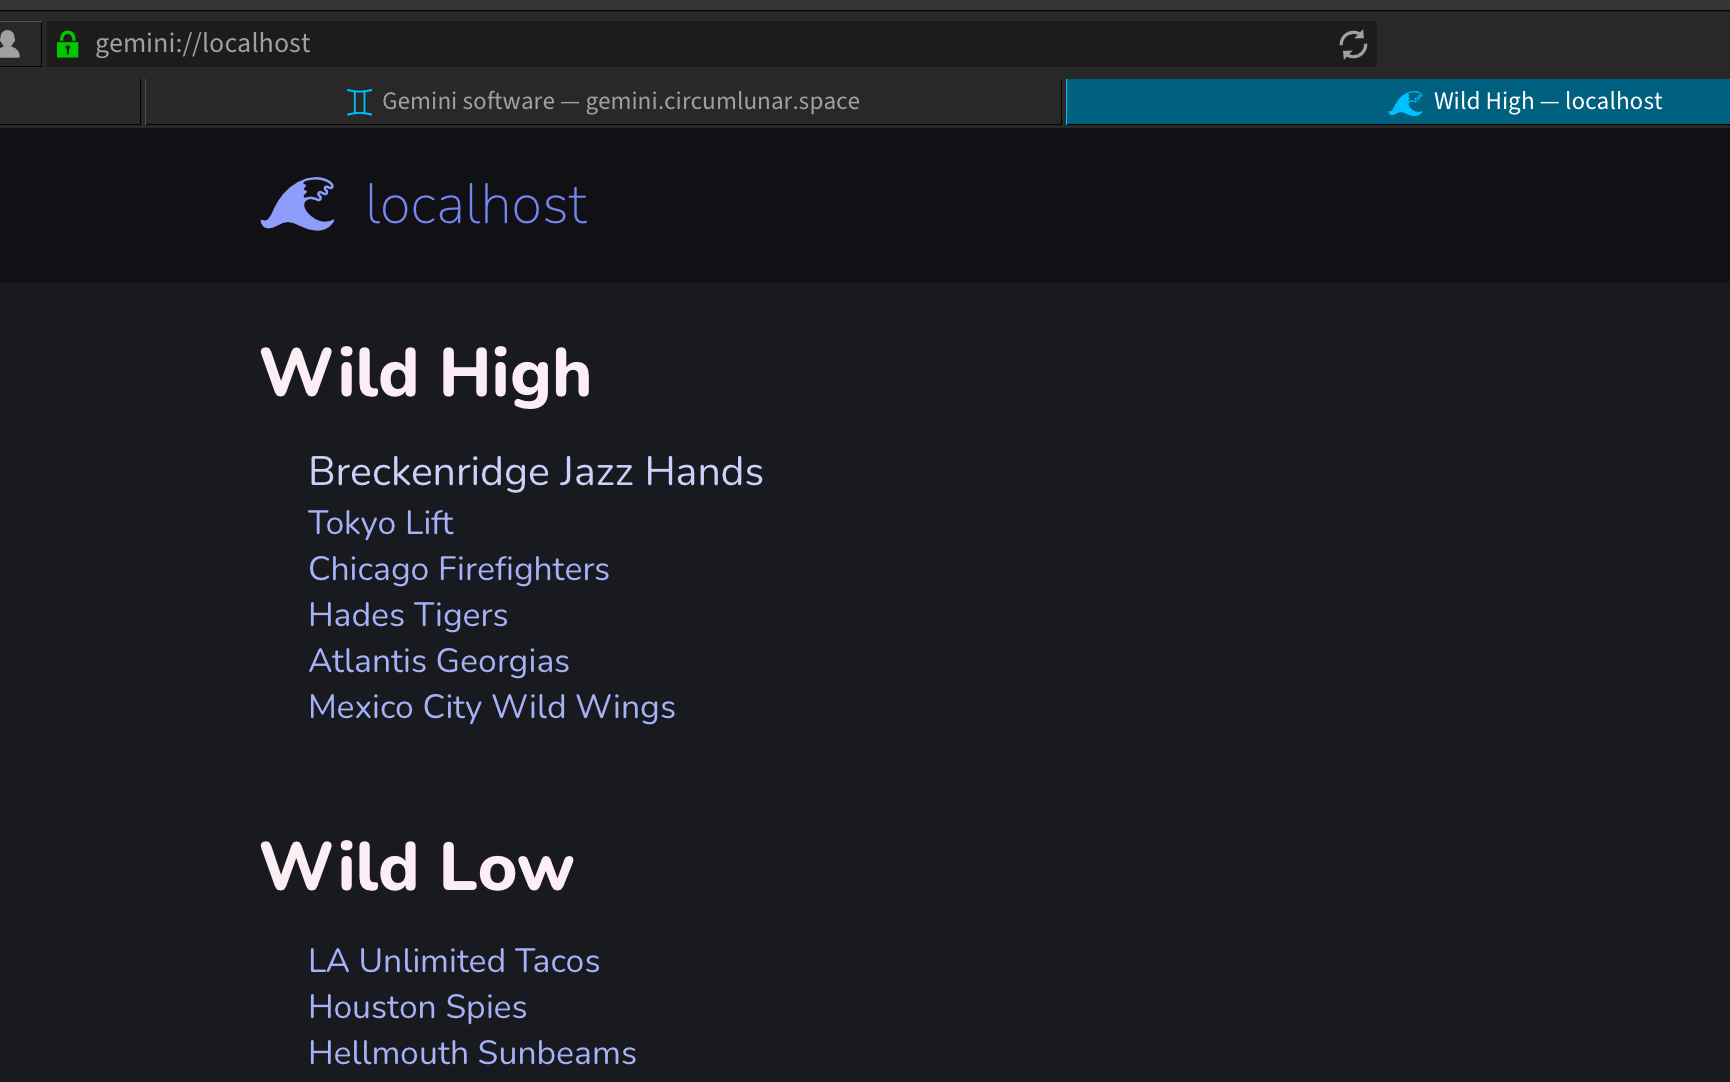 A screenshot of Lagrange open to gemini://localhost. The page header is "Wild High" then "Breckenridge Jazz Hands, Tokyo Lift, Chicago Firefighters," etc.